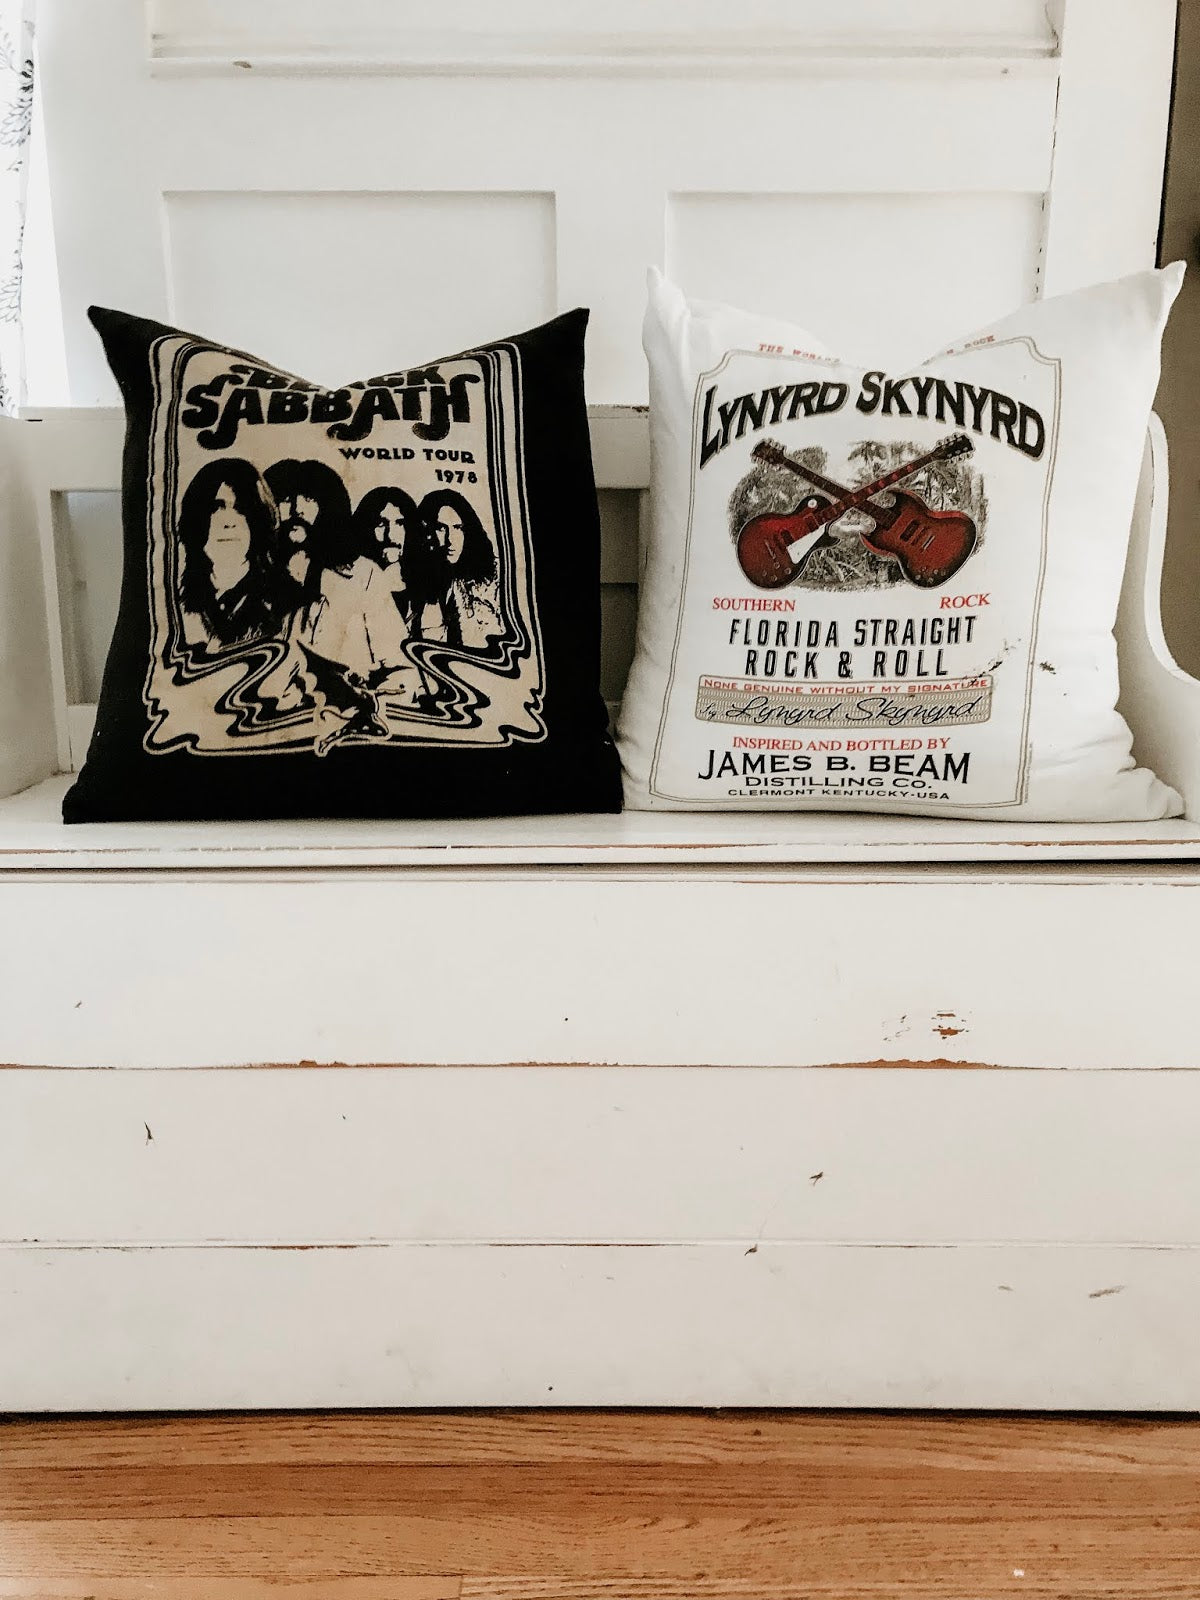 How To Make Pillows Out Of T Shirts?